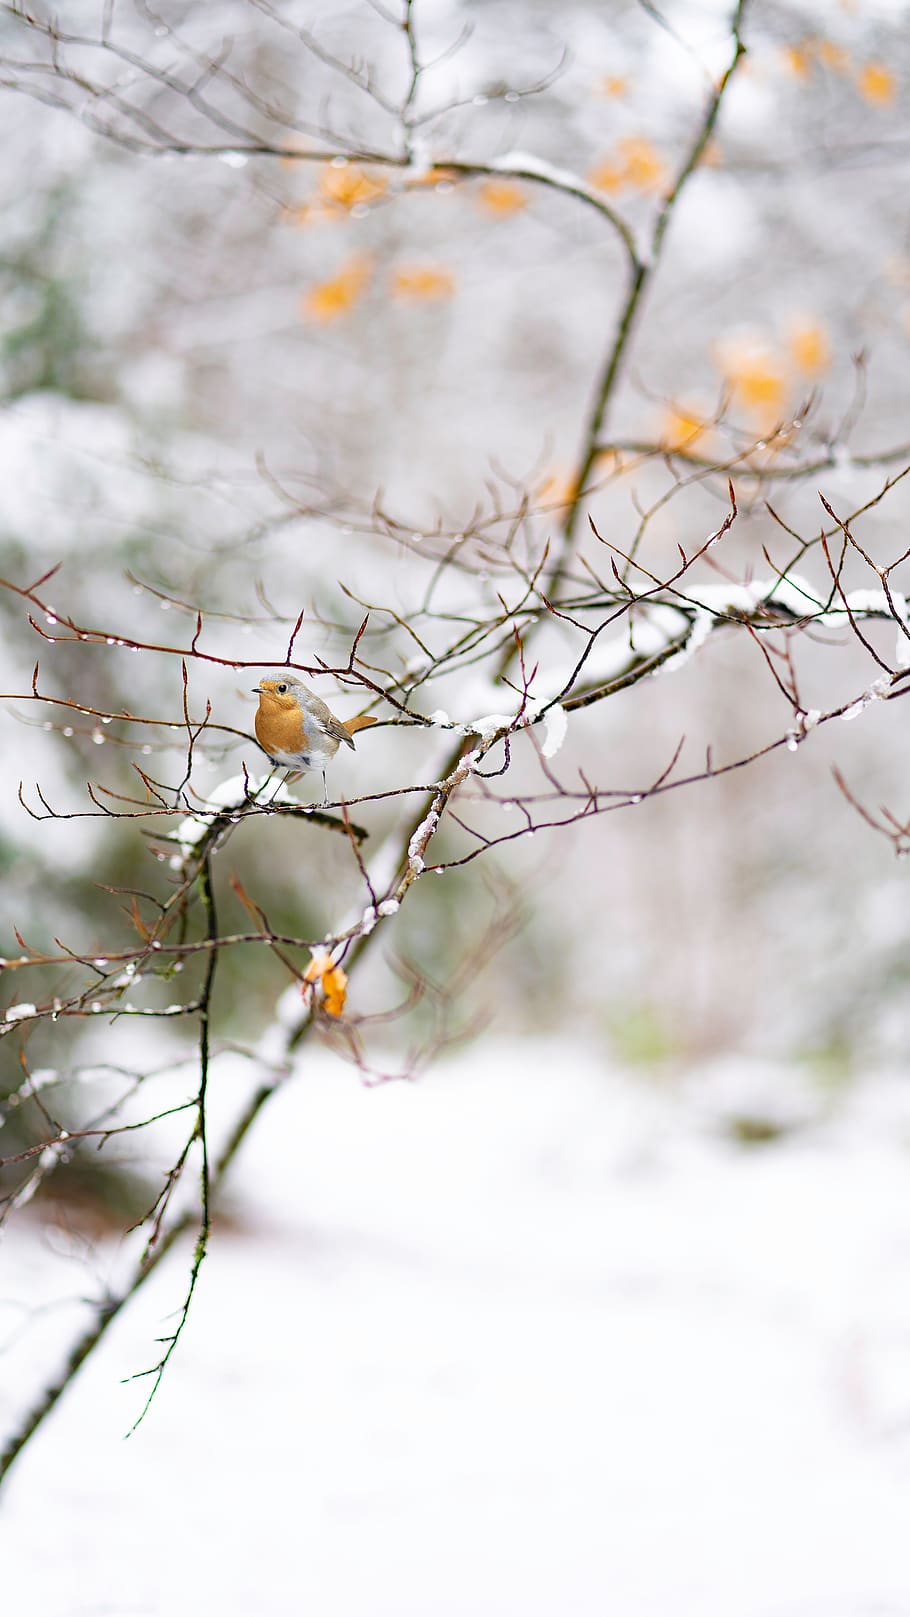 snow, winter, robin, nature, cold, outdoors, wintry, tree, plant, focus on foreground